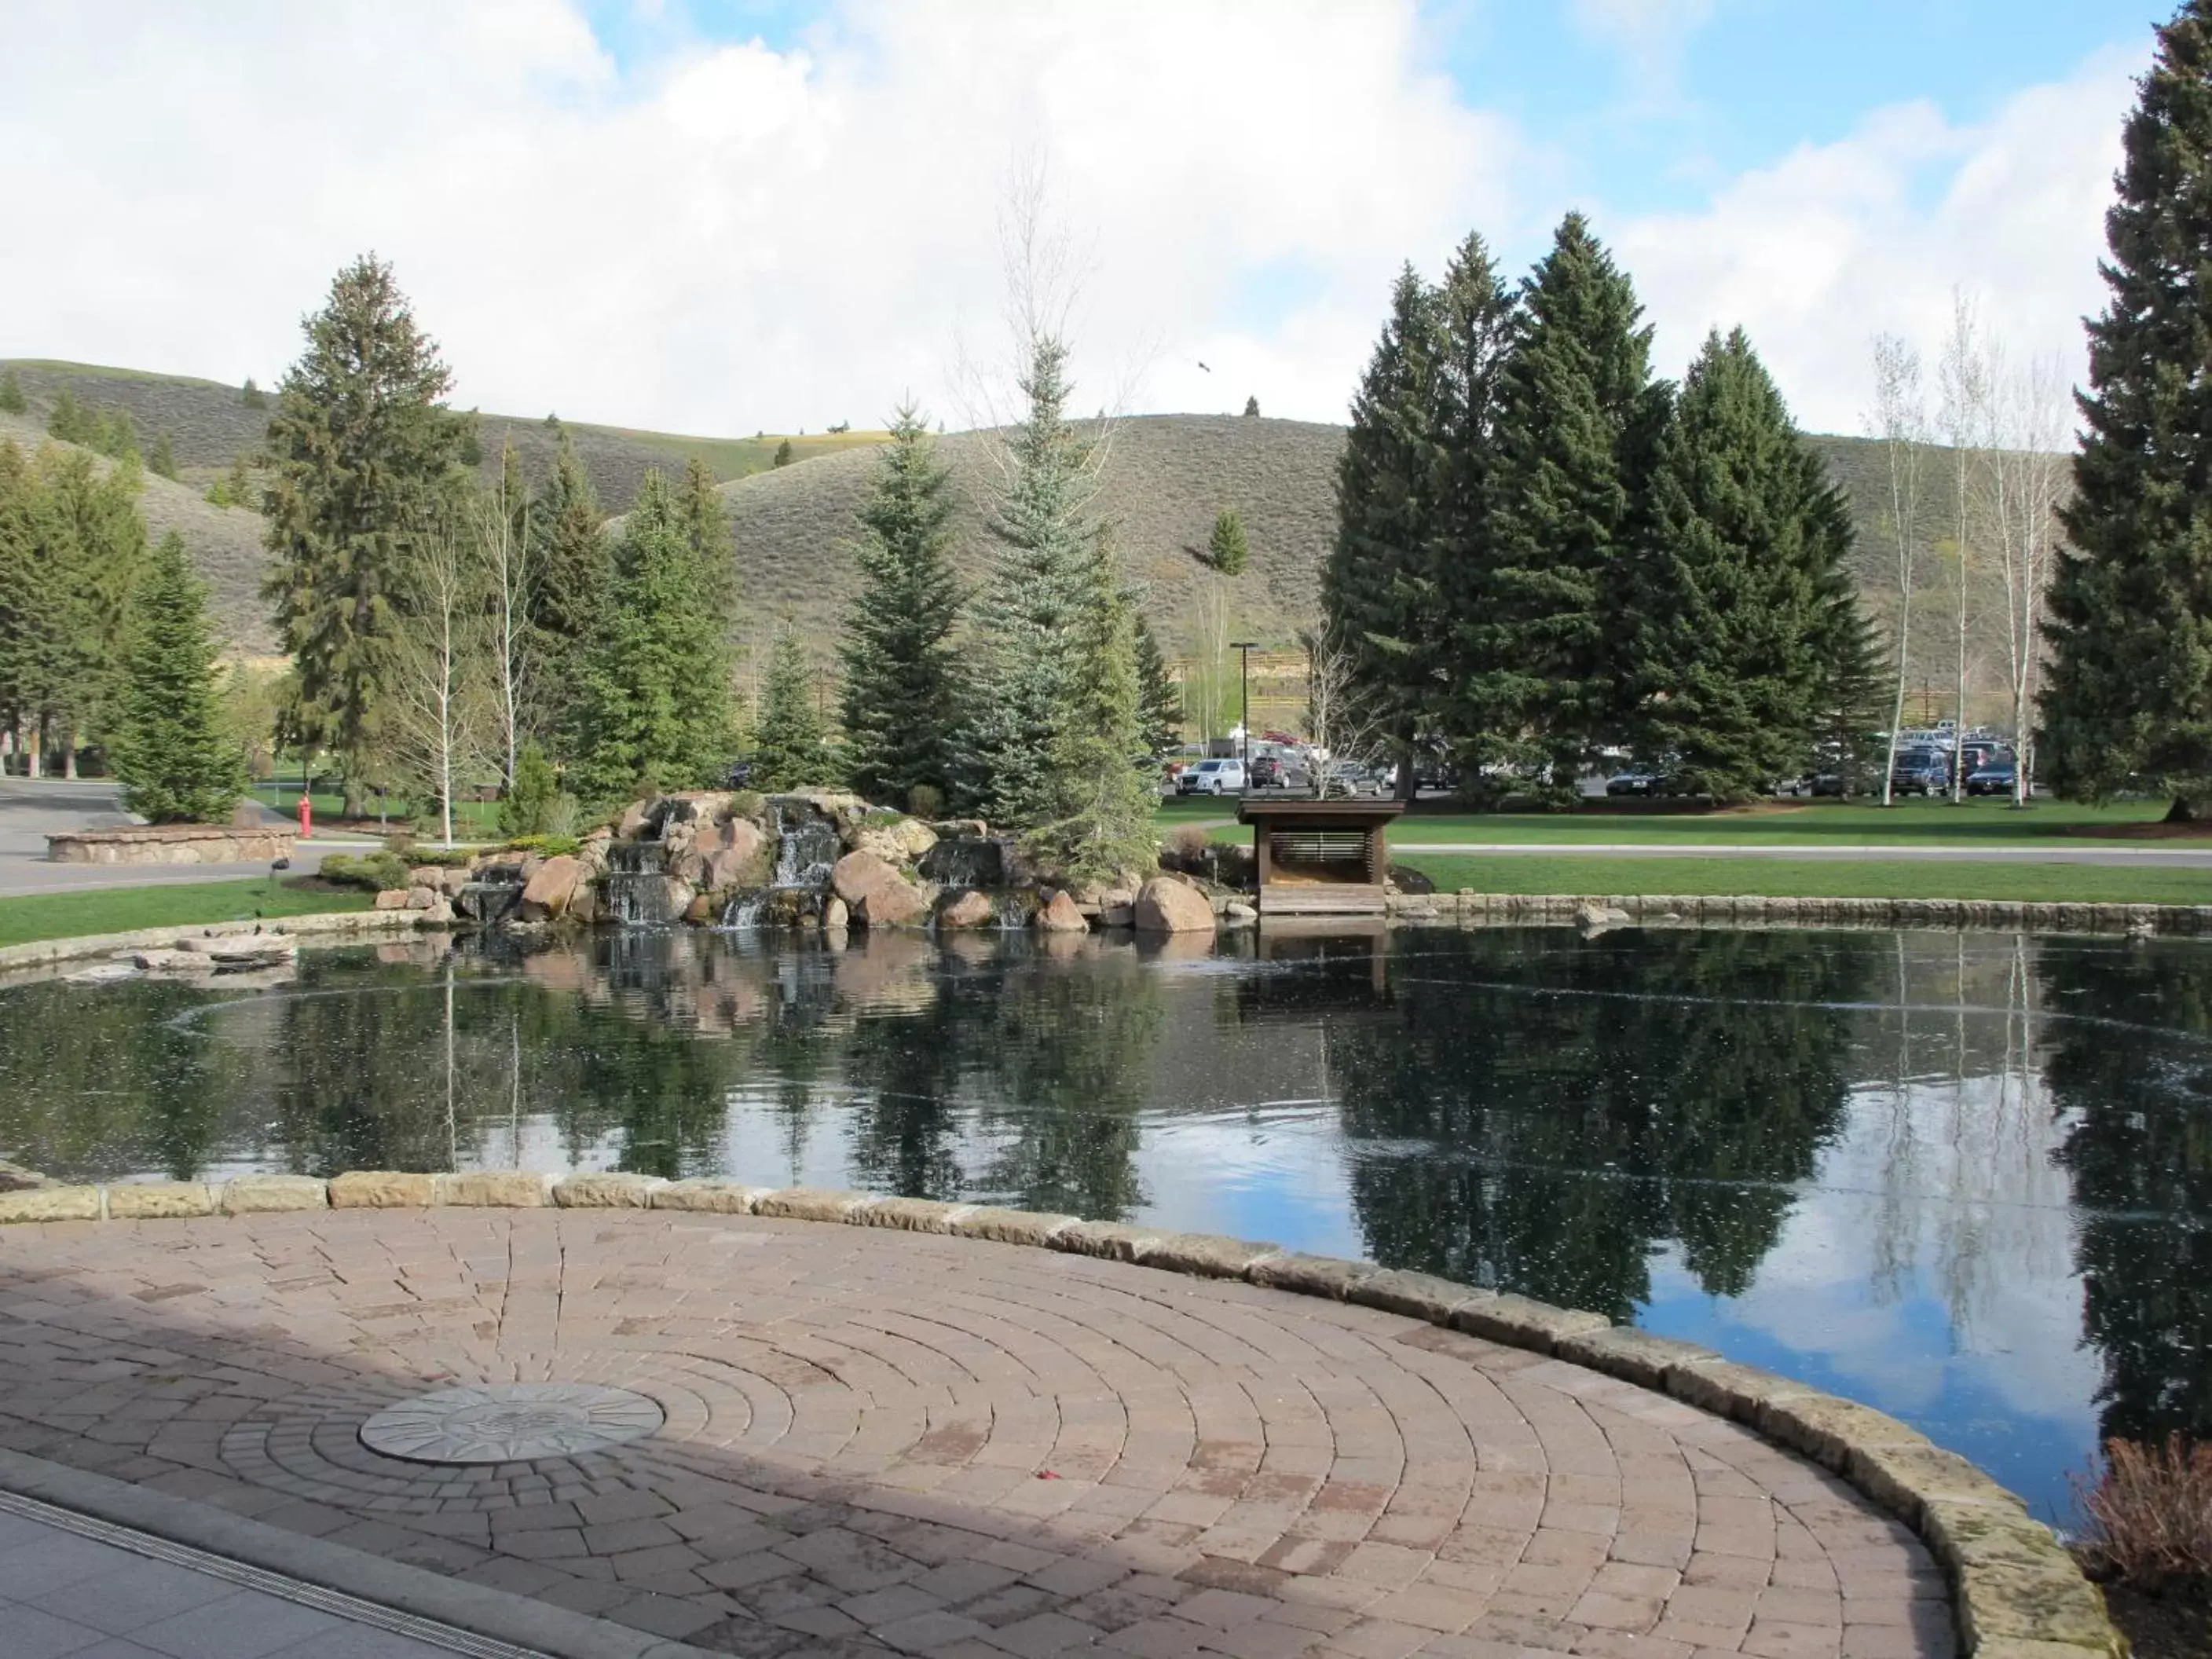 Area and facilities in Sun Valley Resort